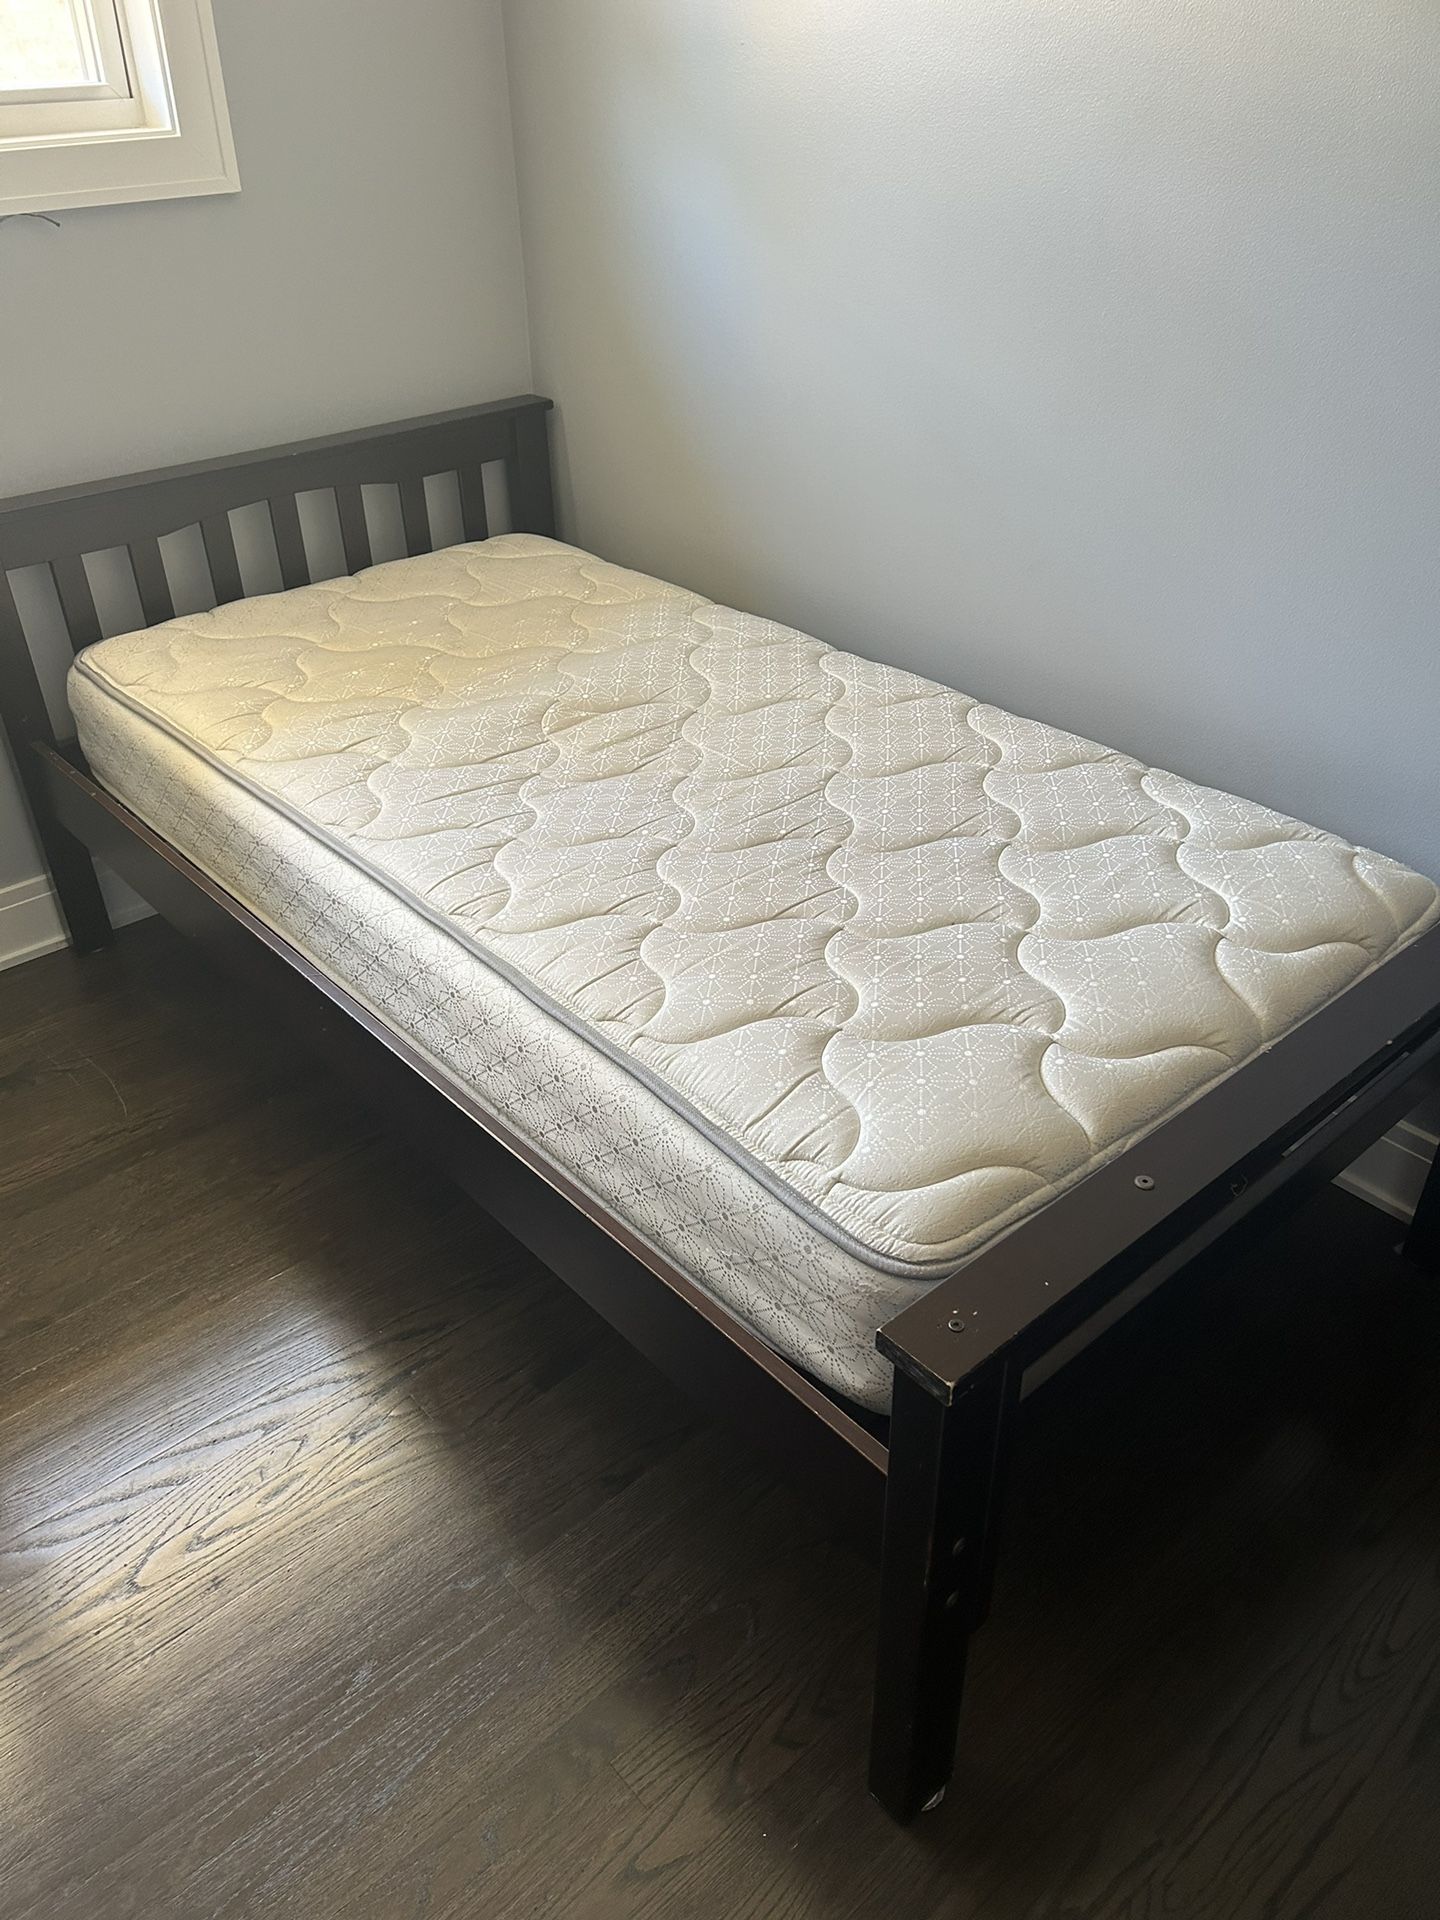 Twin Bed Frame And Make ‼️MAKE AN OFFER‼️